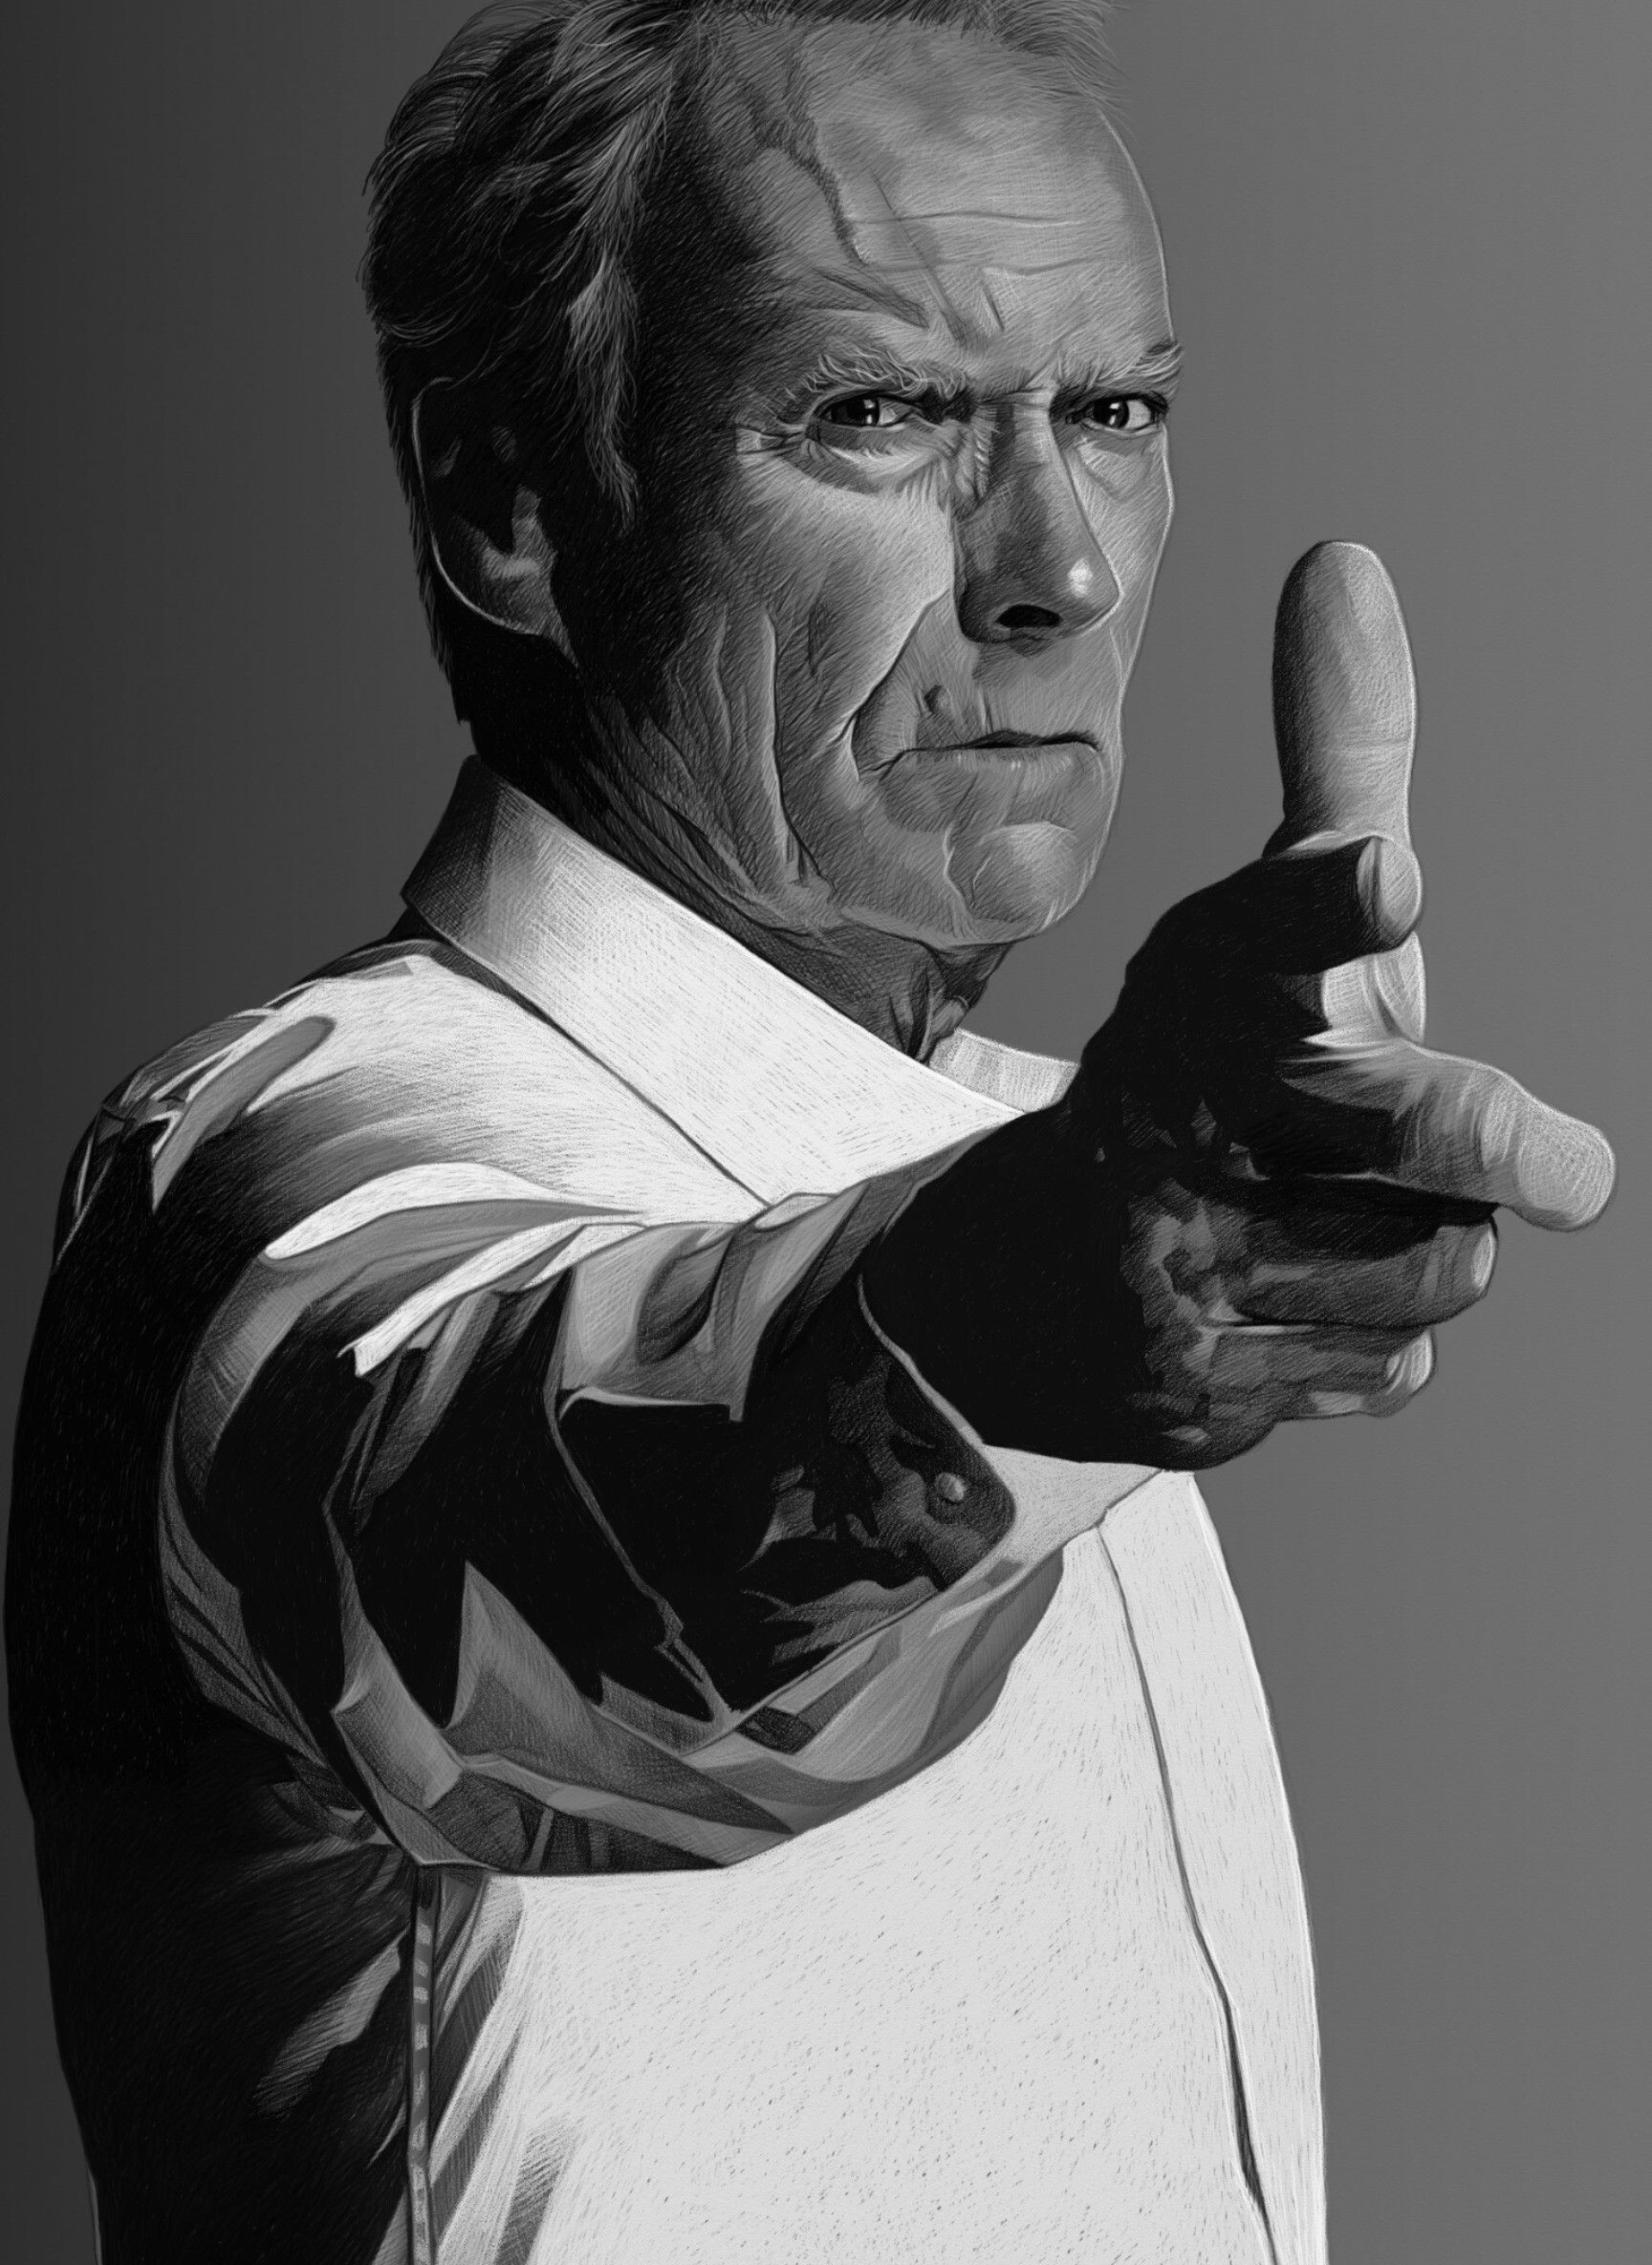 Clint Eastwood: Black-And-White Portrait, "Pointing Finger" Gesture Has Become The Visiting Card Of An American Western Star. 1920x2640 HD Wallpaper.